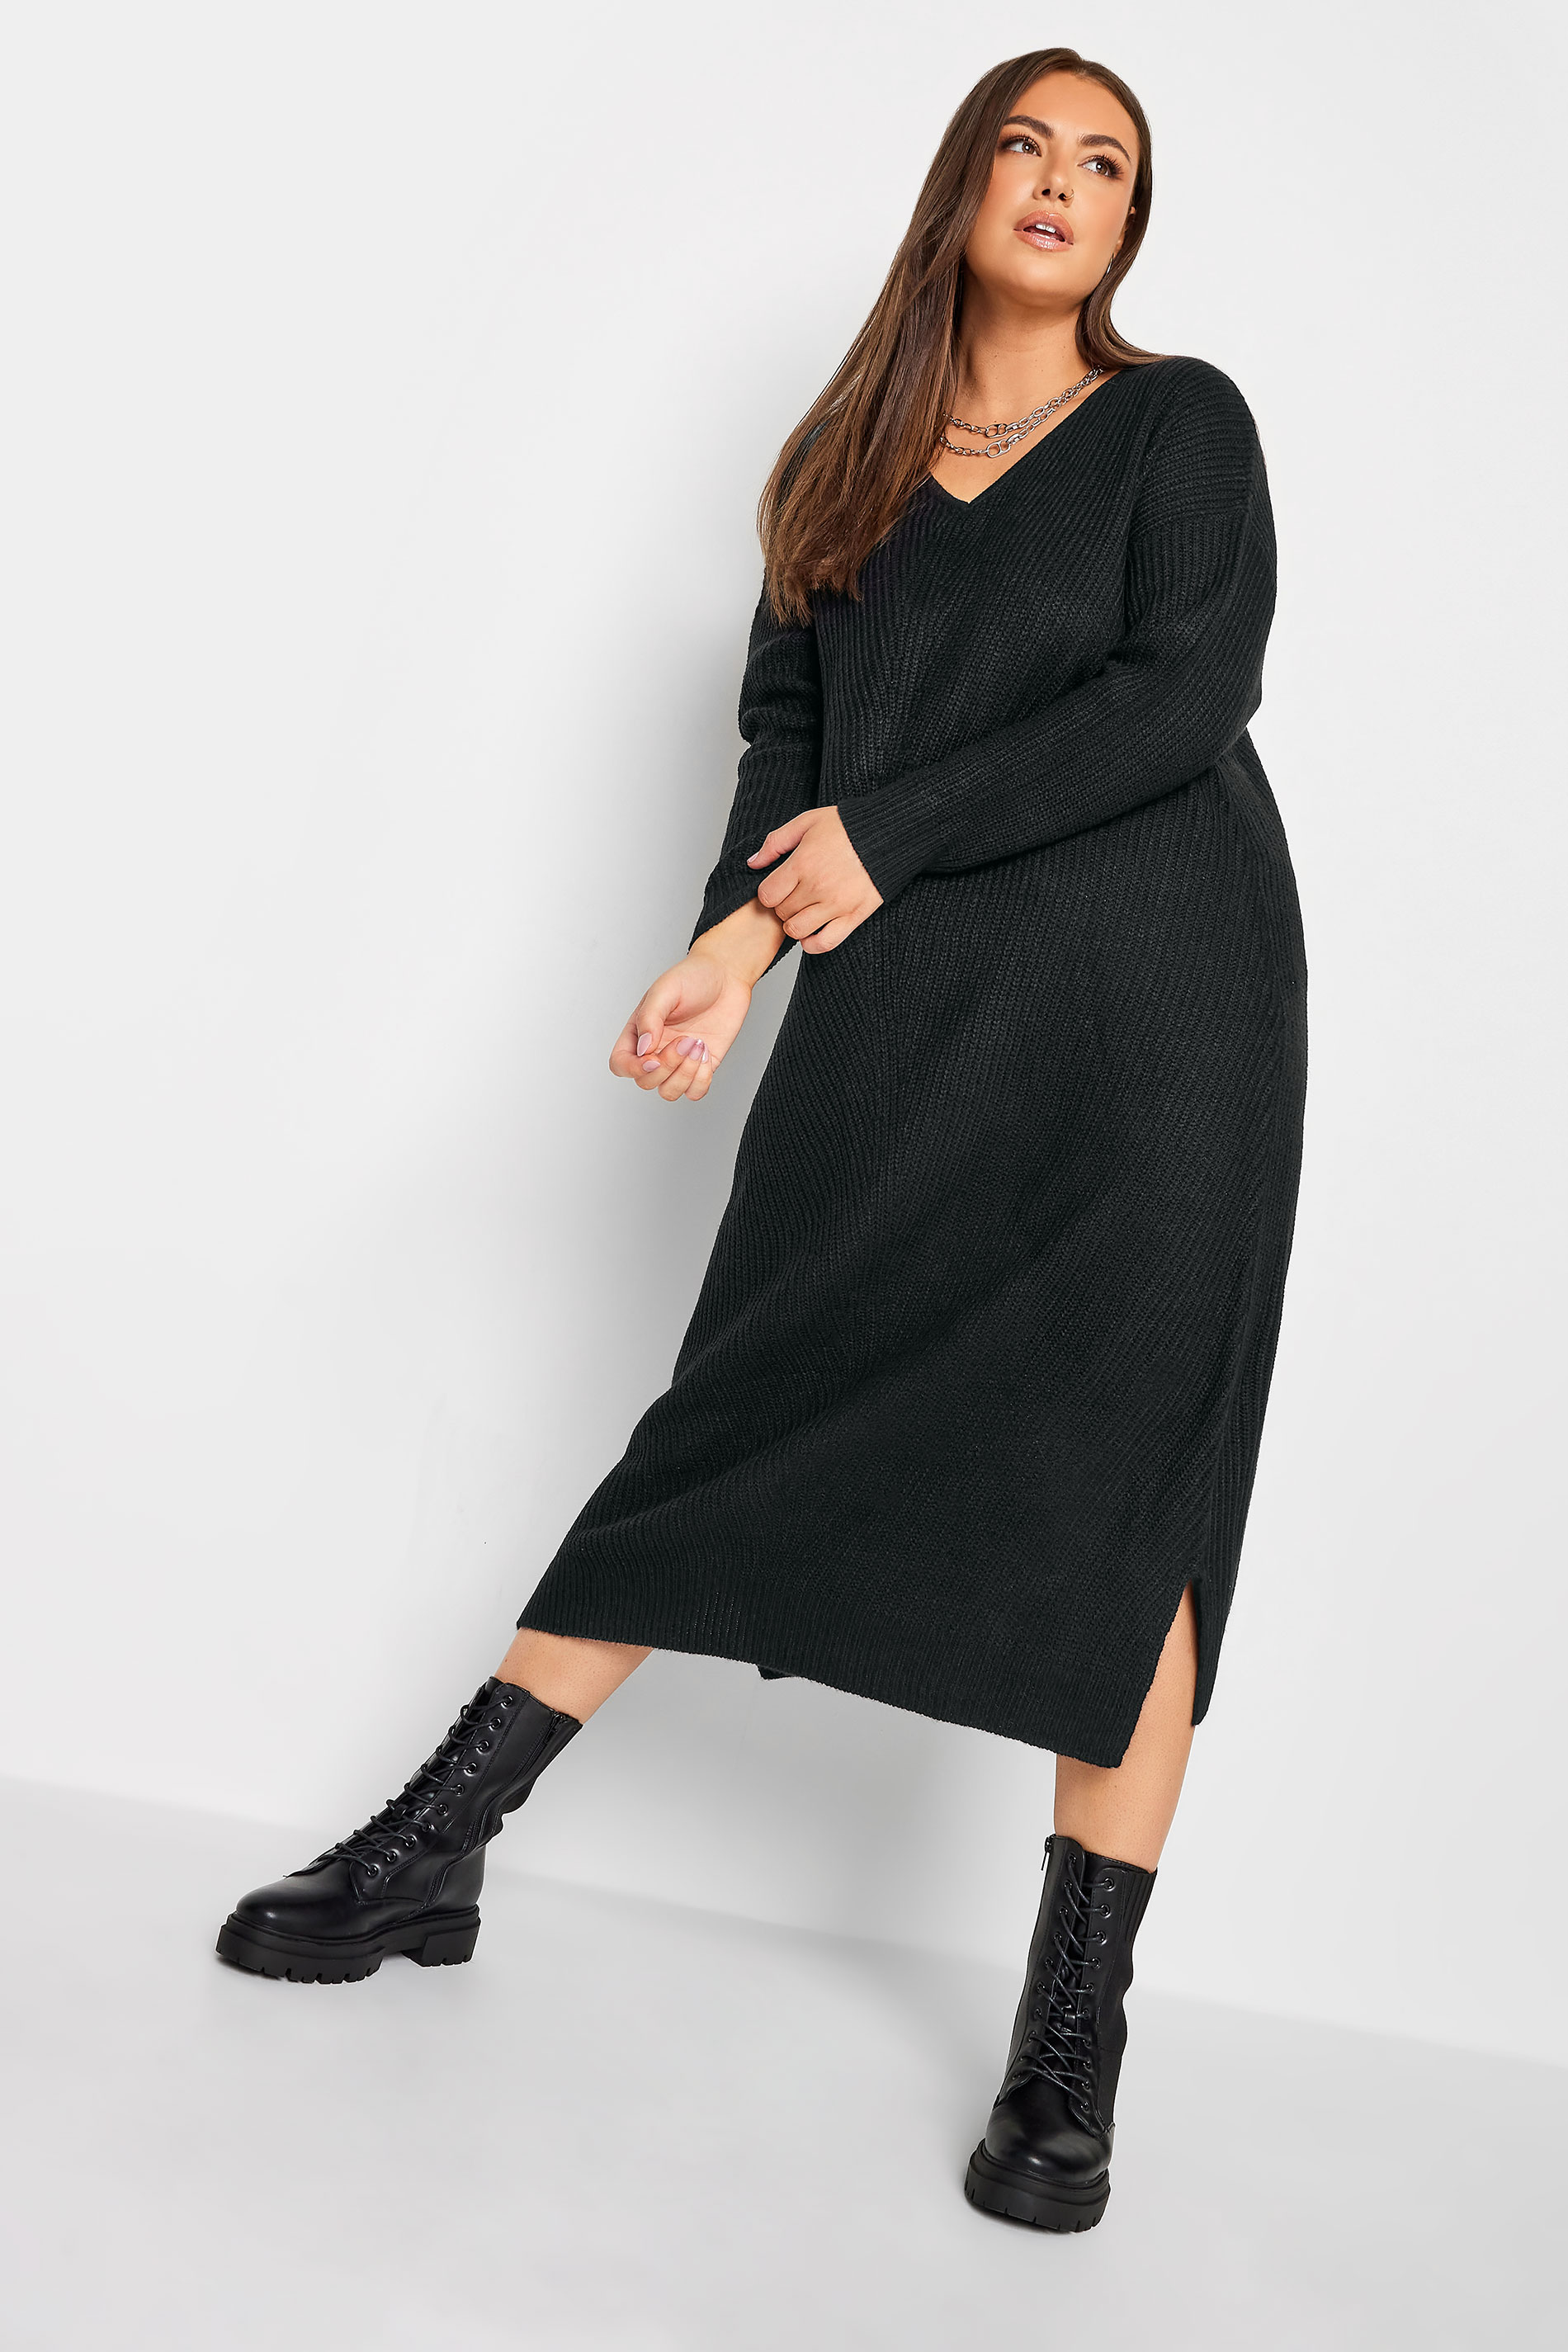 YOURS Plus Size Black Midaxi Knitted Jumper Dress | Yours Clothing 1